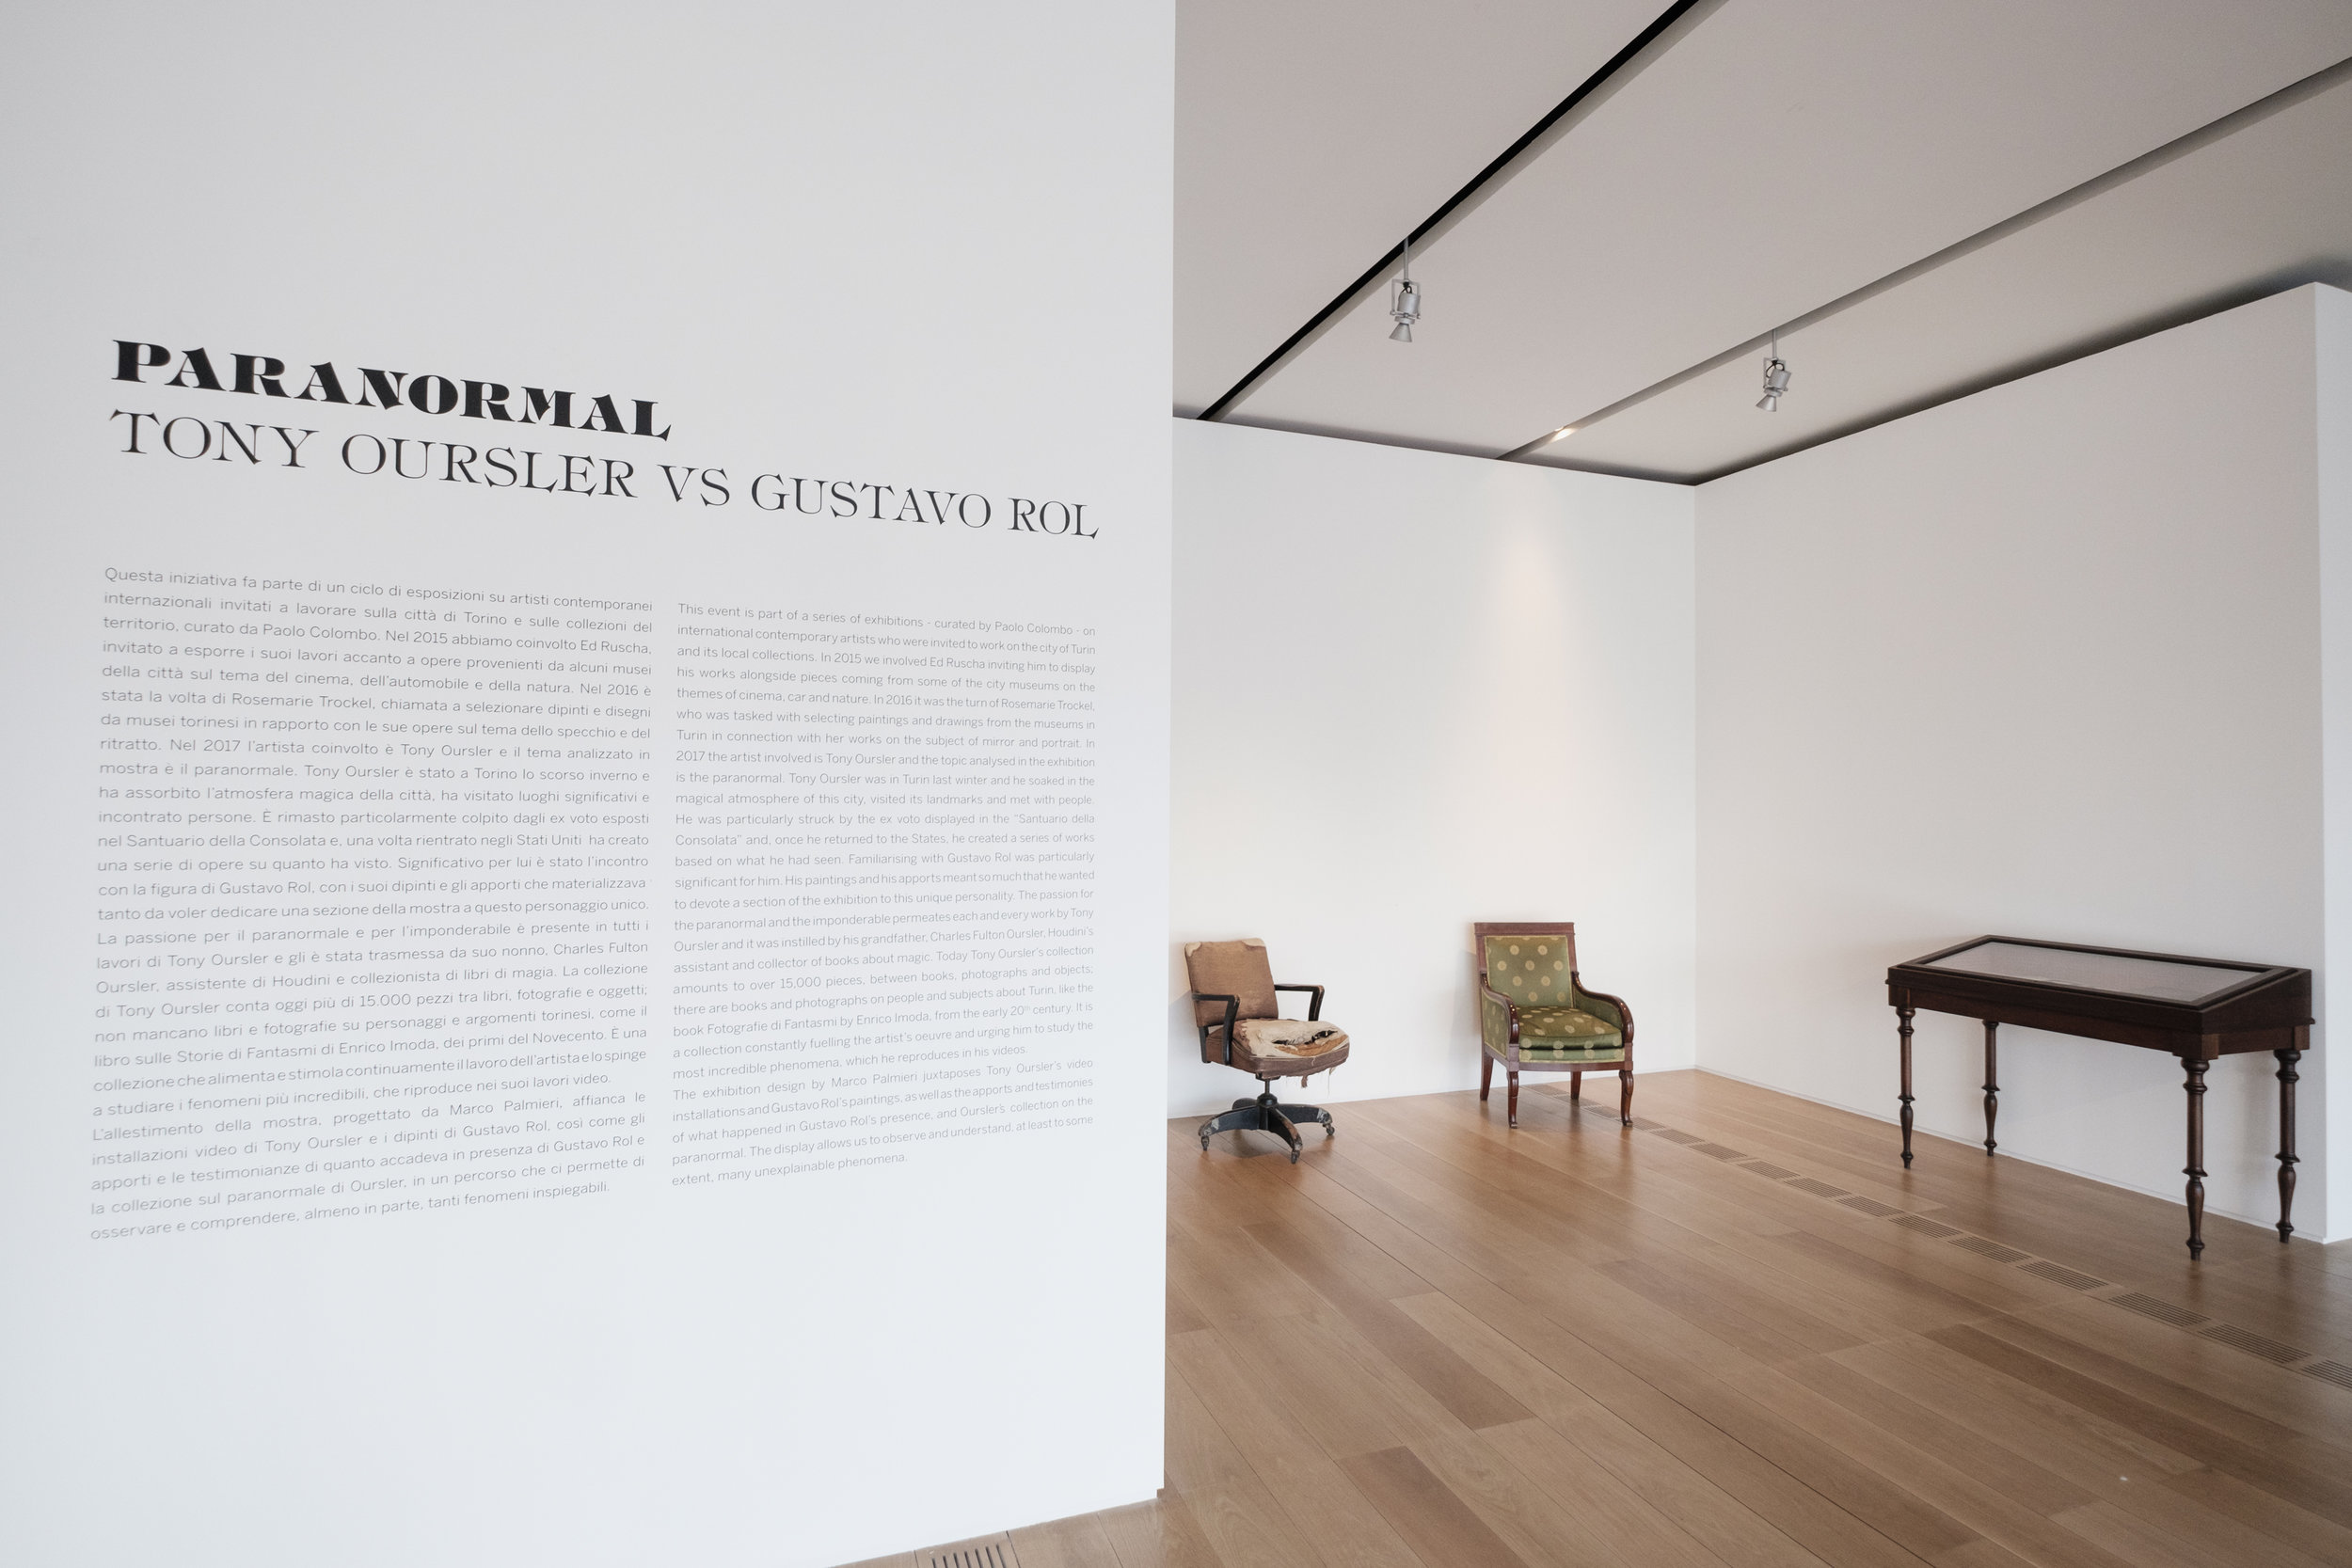 Installation view with Fulton Ourlser and Gustavo Rol's chairs